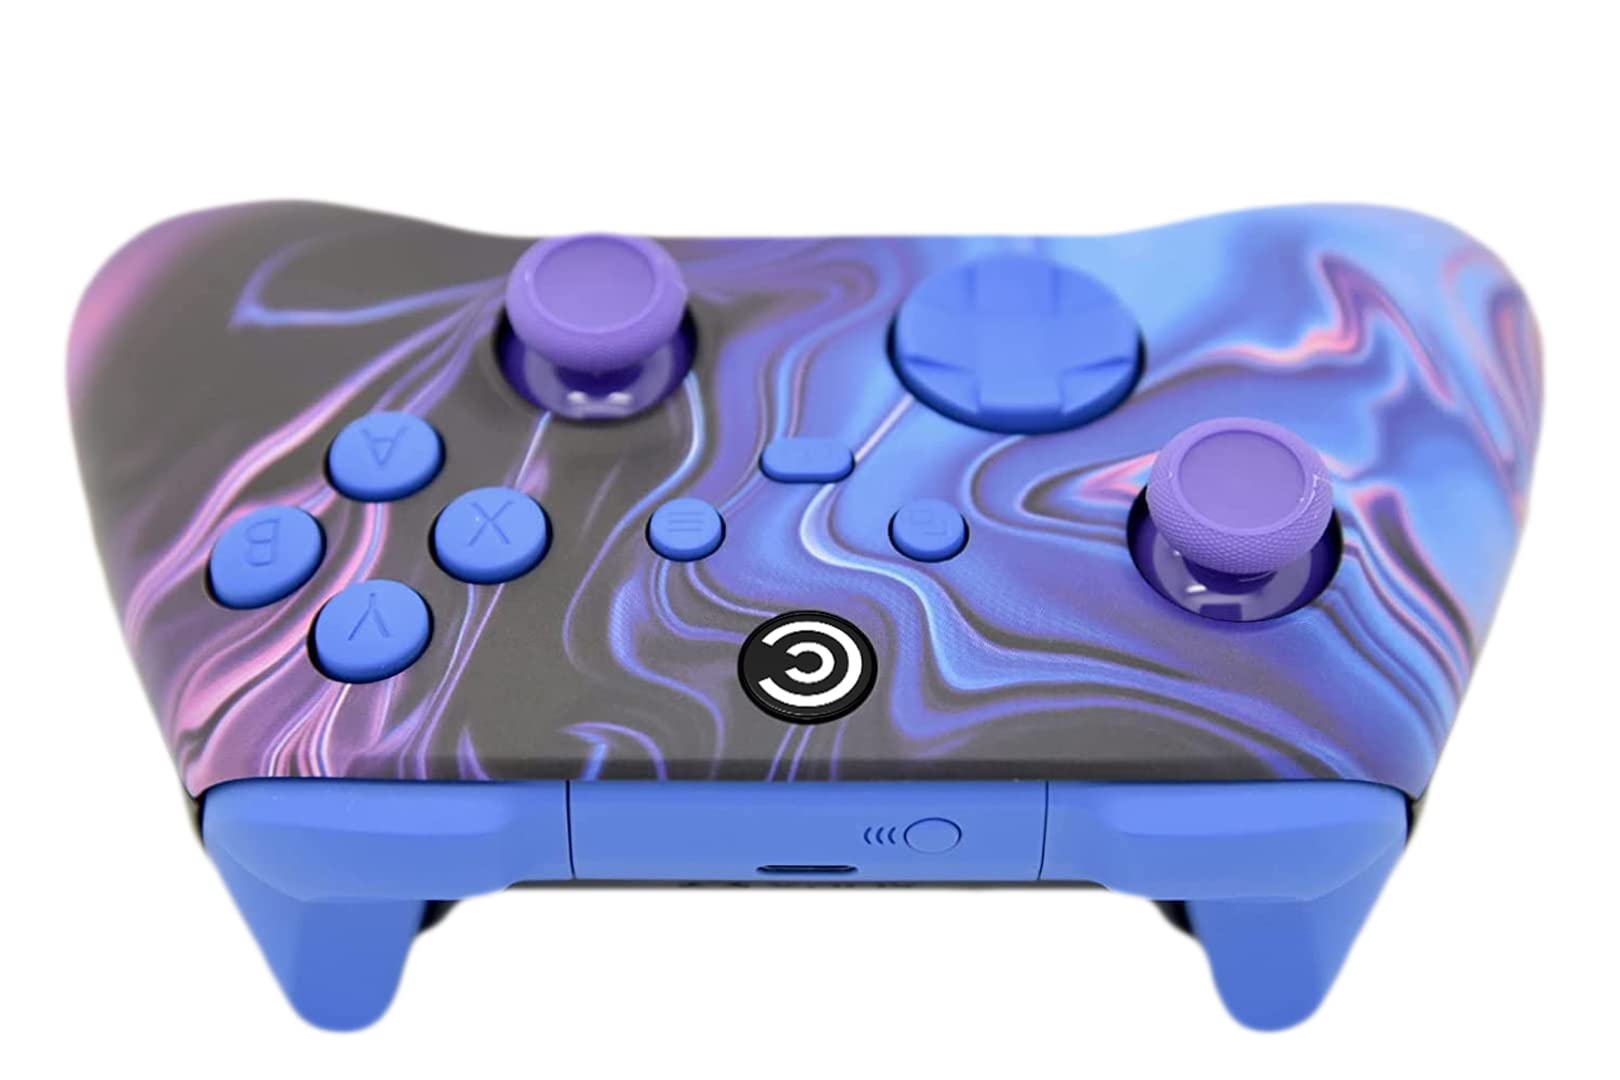 Designer Series Custom Wireless Controller for PC, Windows, Series X/S & One - Multiple Designs Available (Blue & Purple Swirl W/Blue Inserts)